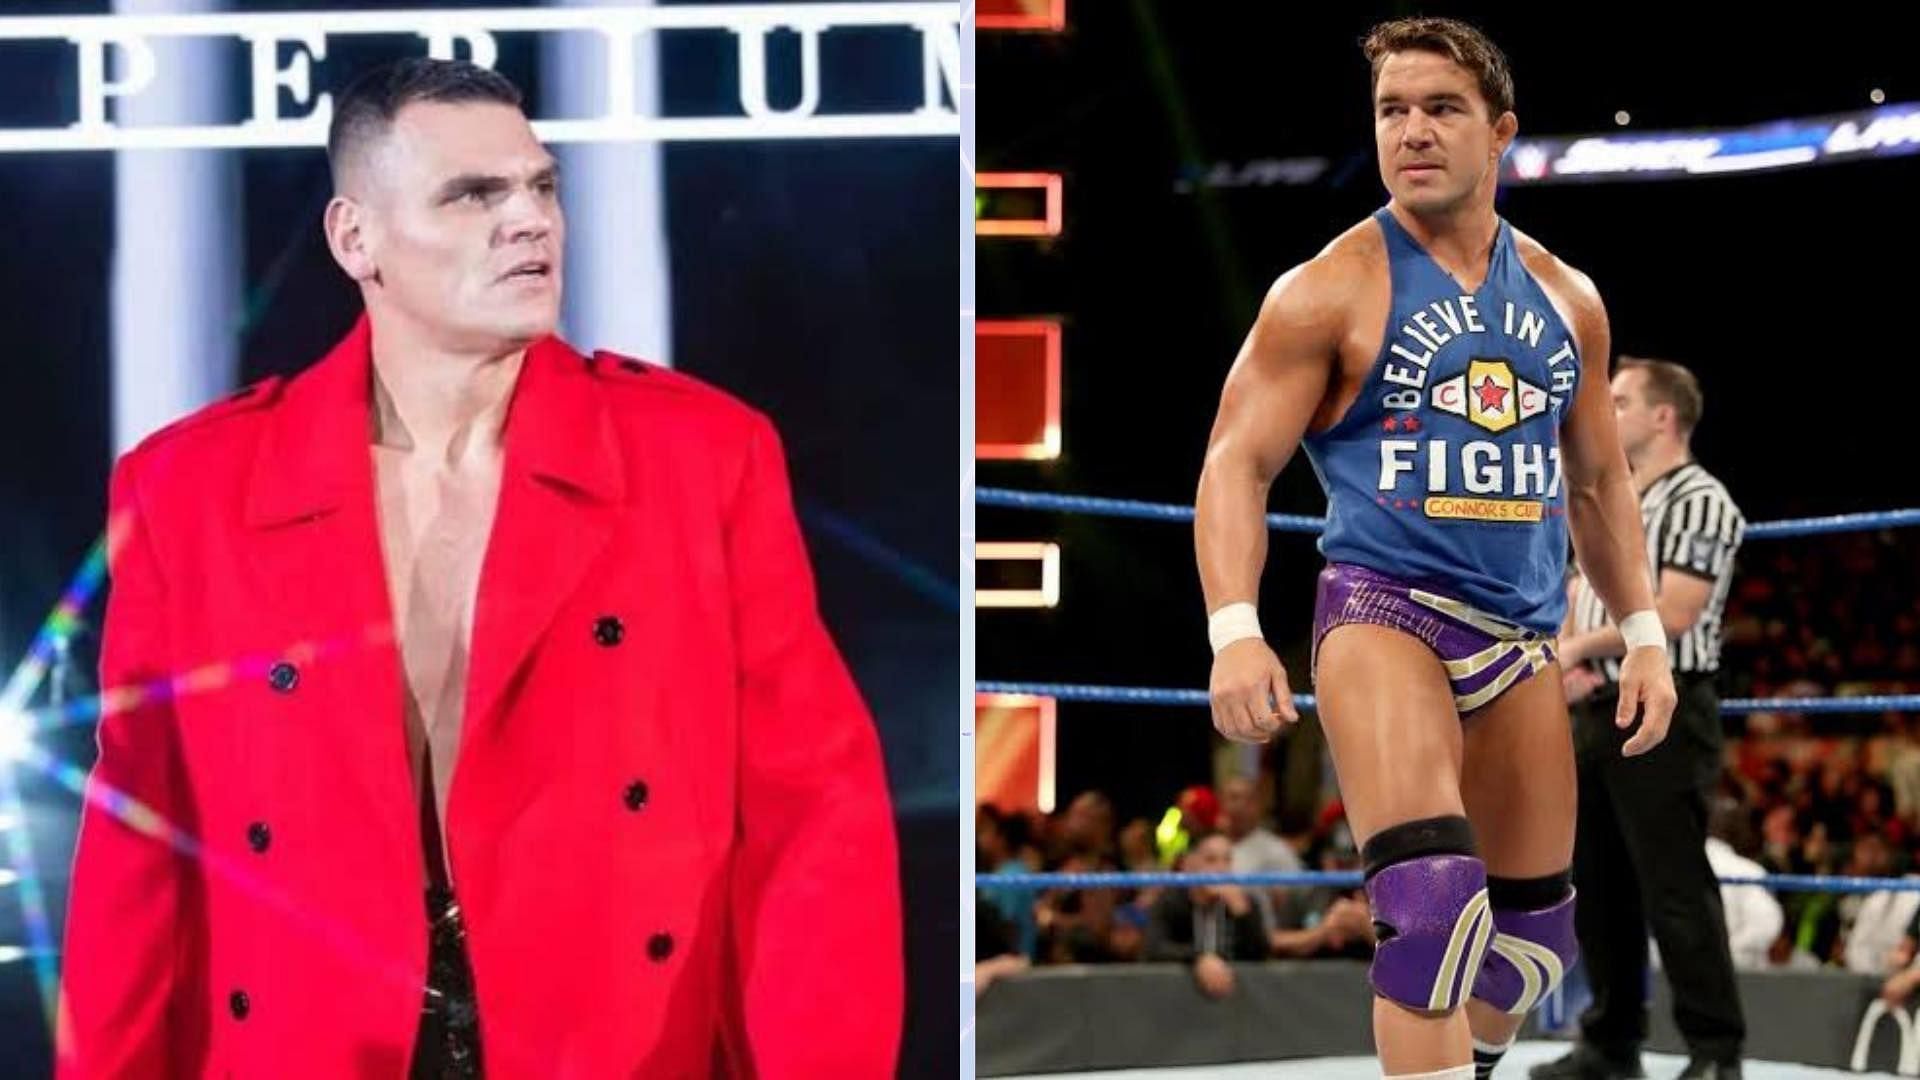 Chad Gable is rumored to be receiving a big push in WWE